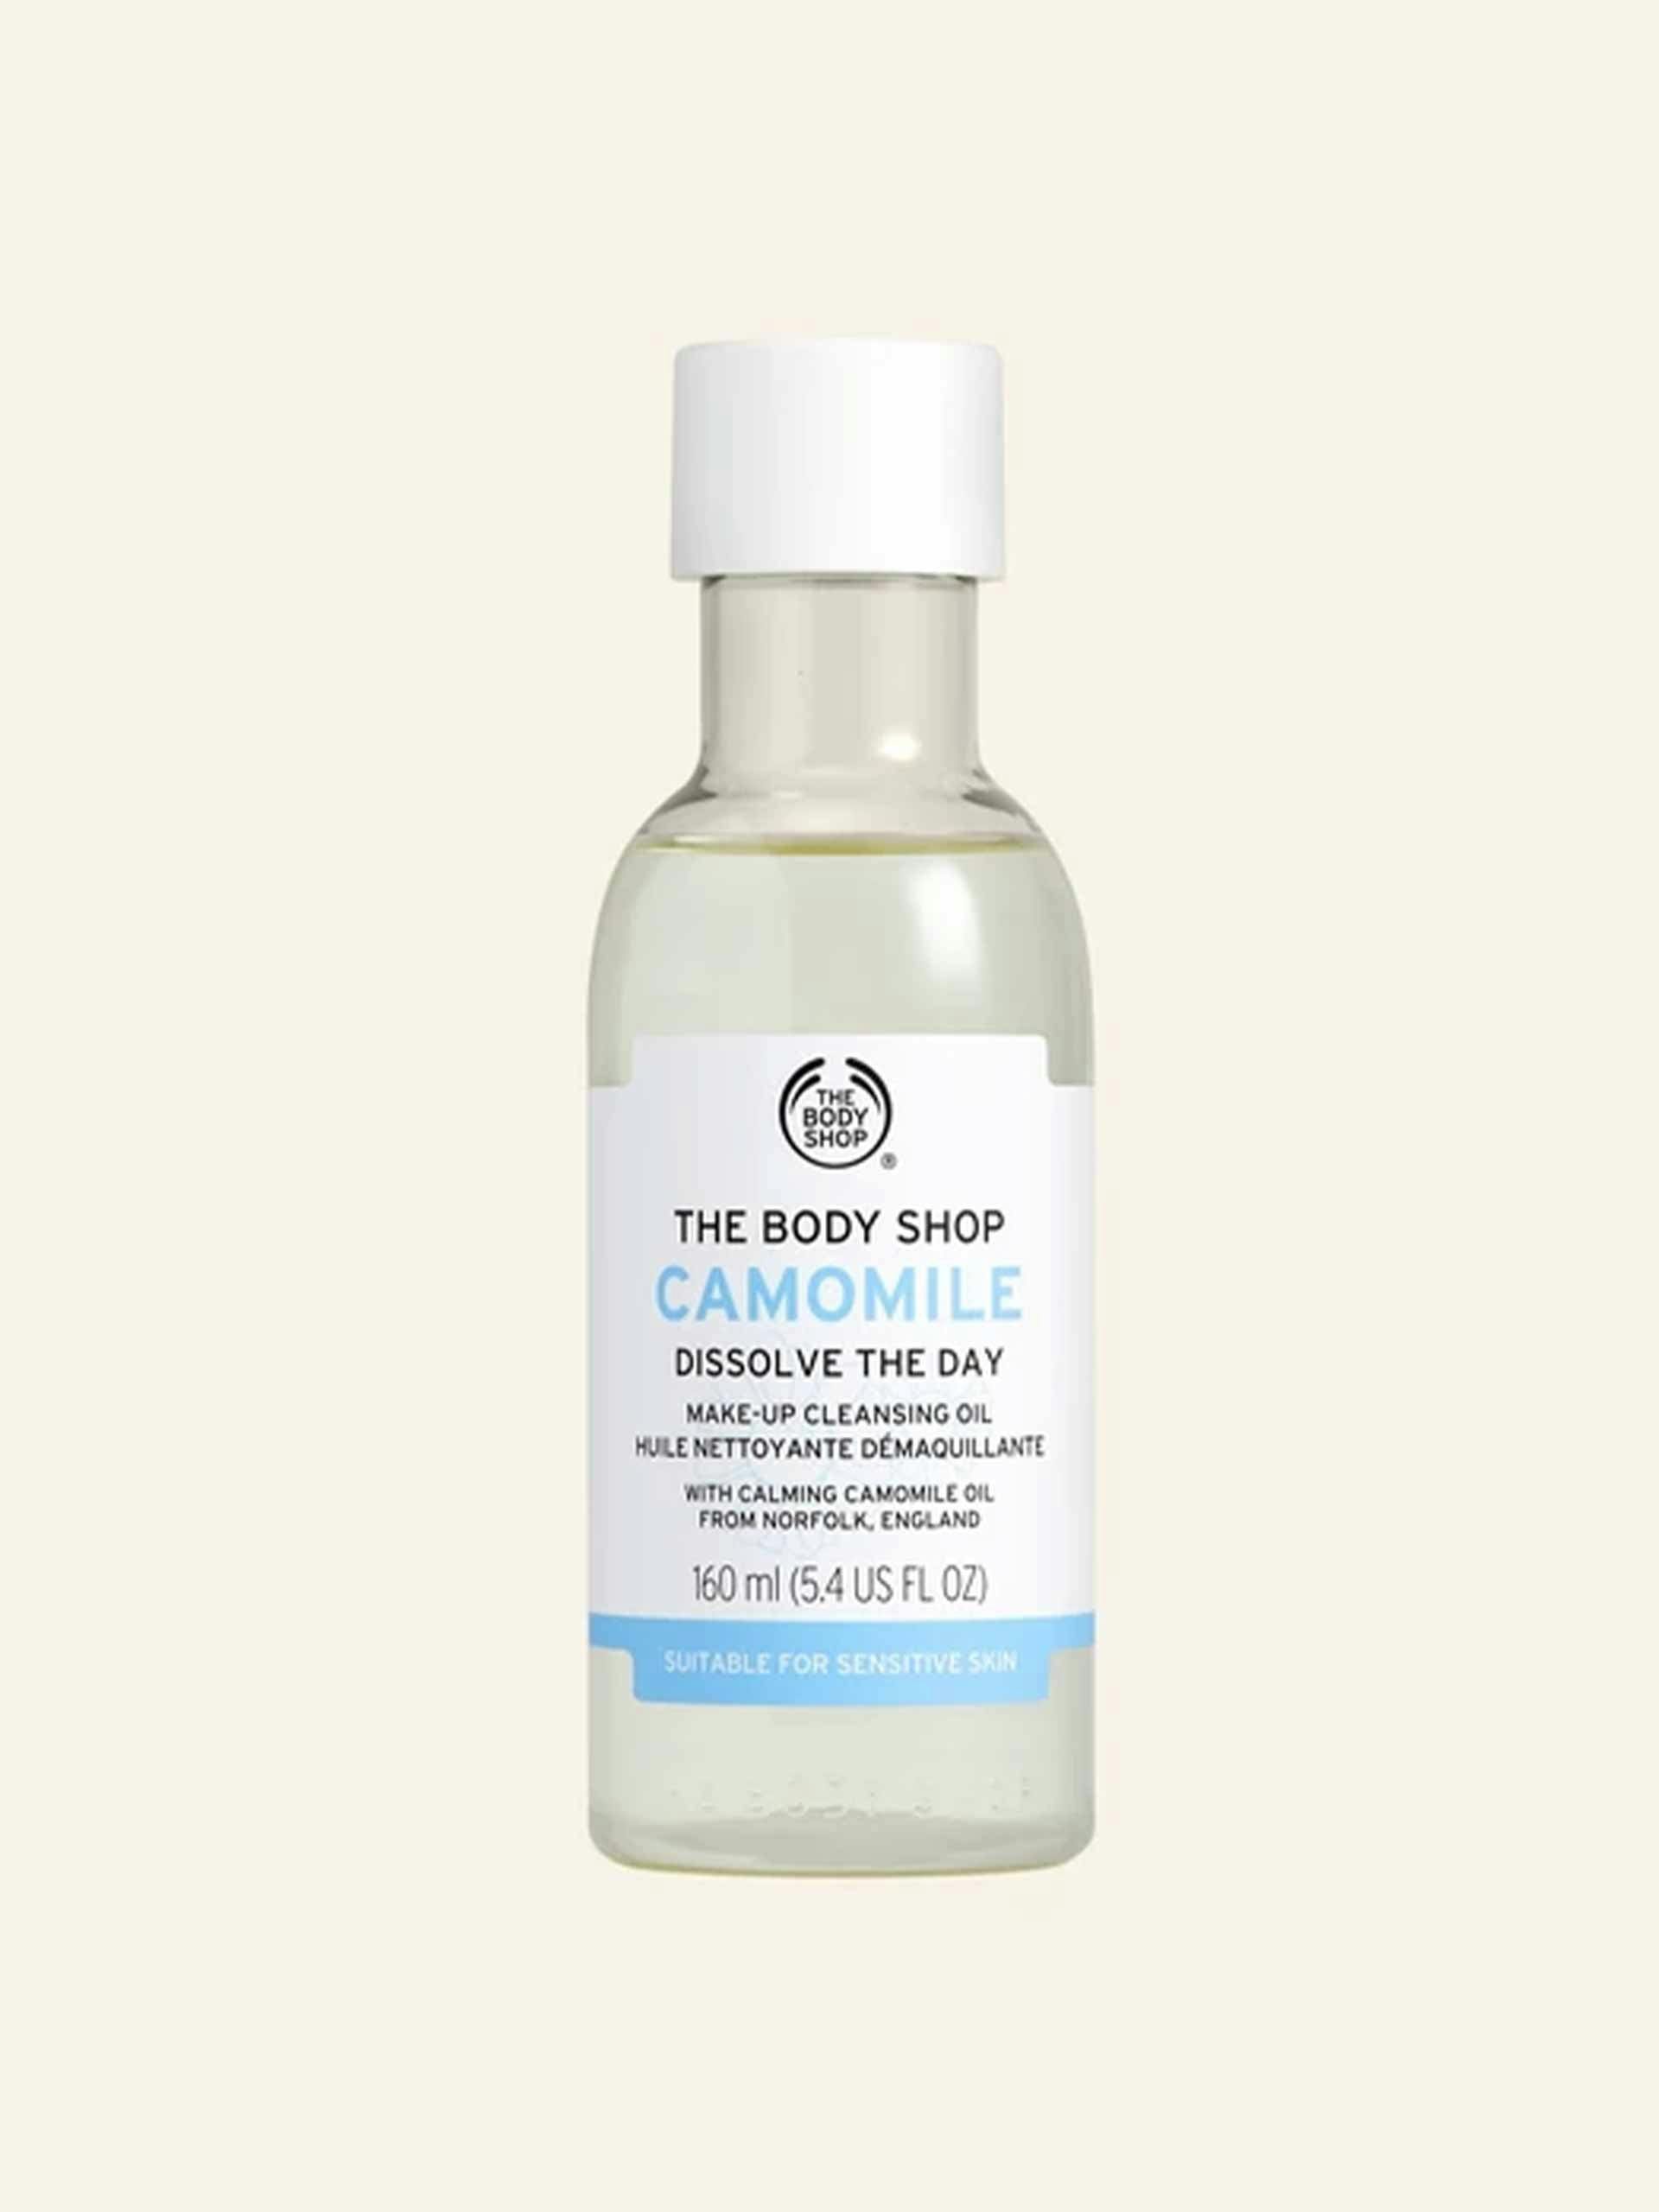 Make-up cleansing oil